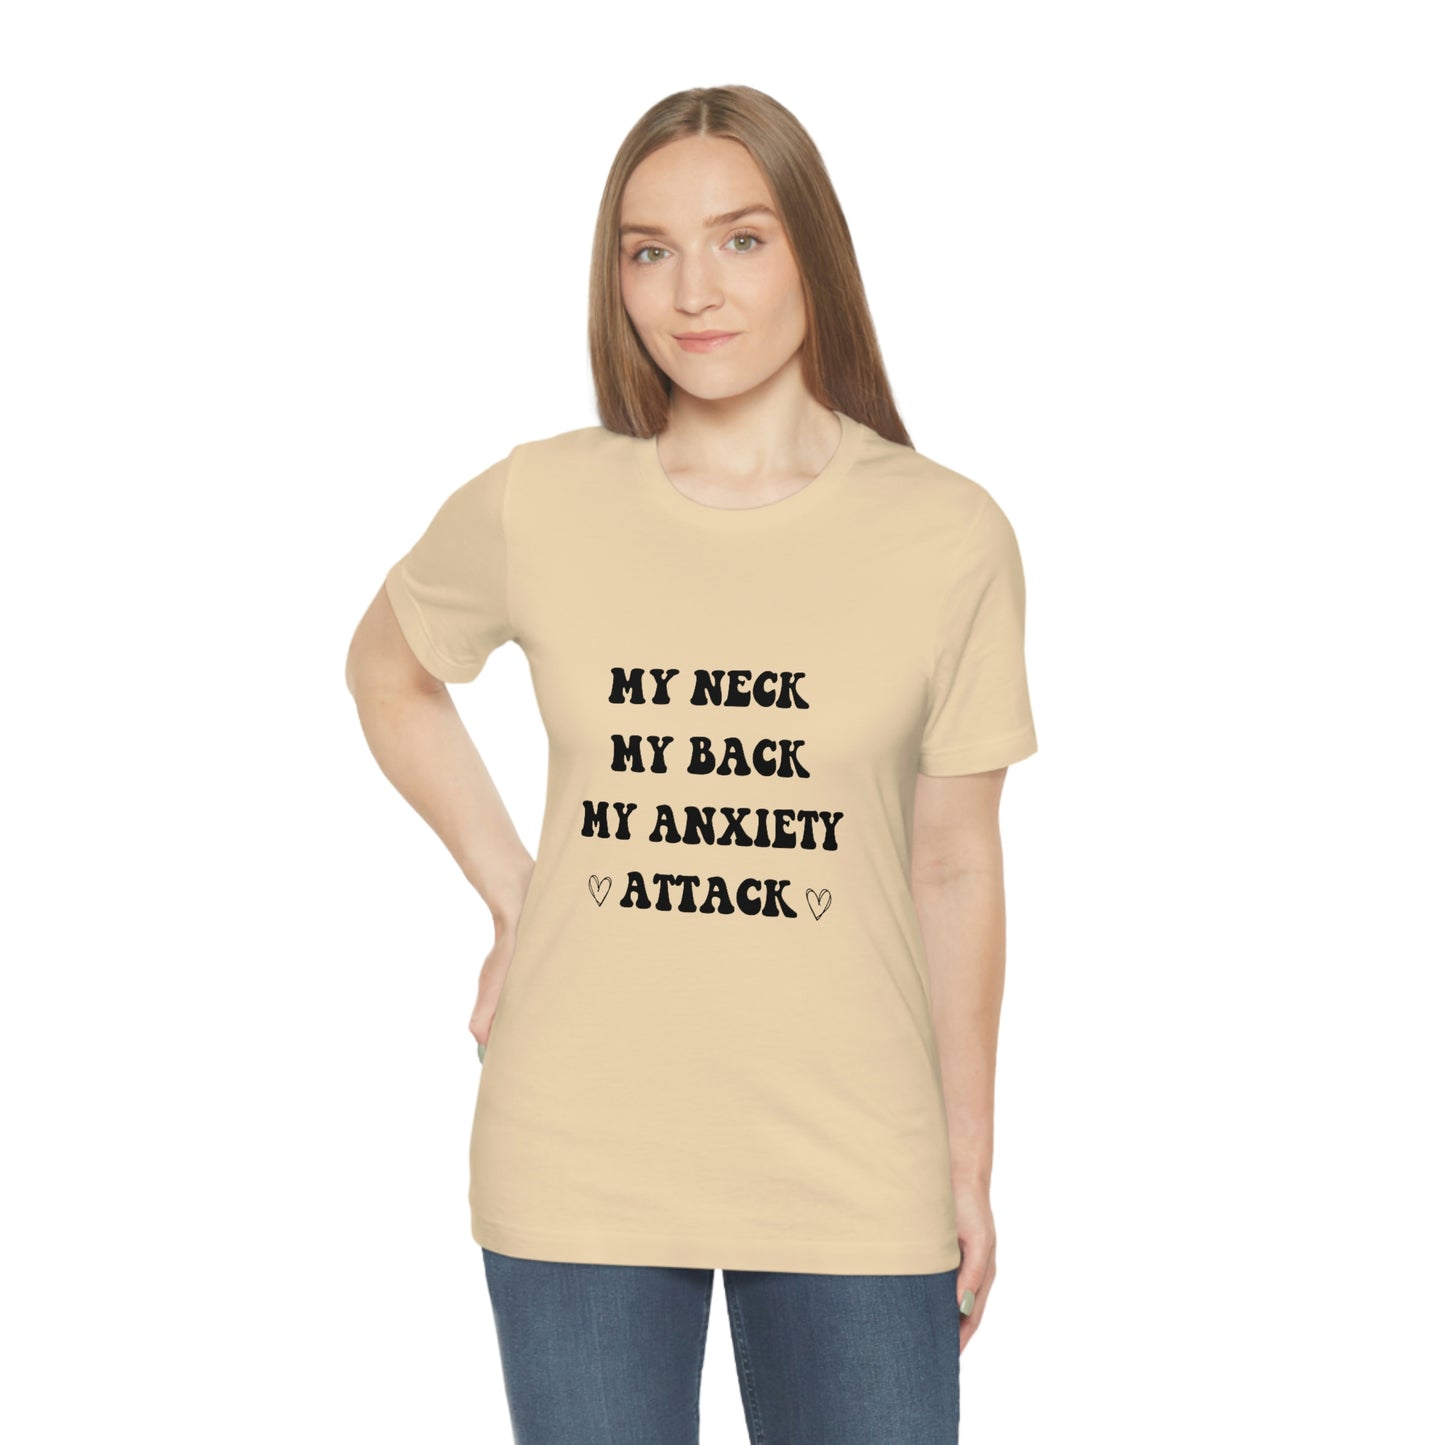 My neck my back my anxiety attack, anxious, ocd, funny tshit, gift for her, gift for him